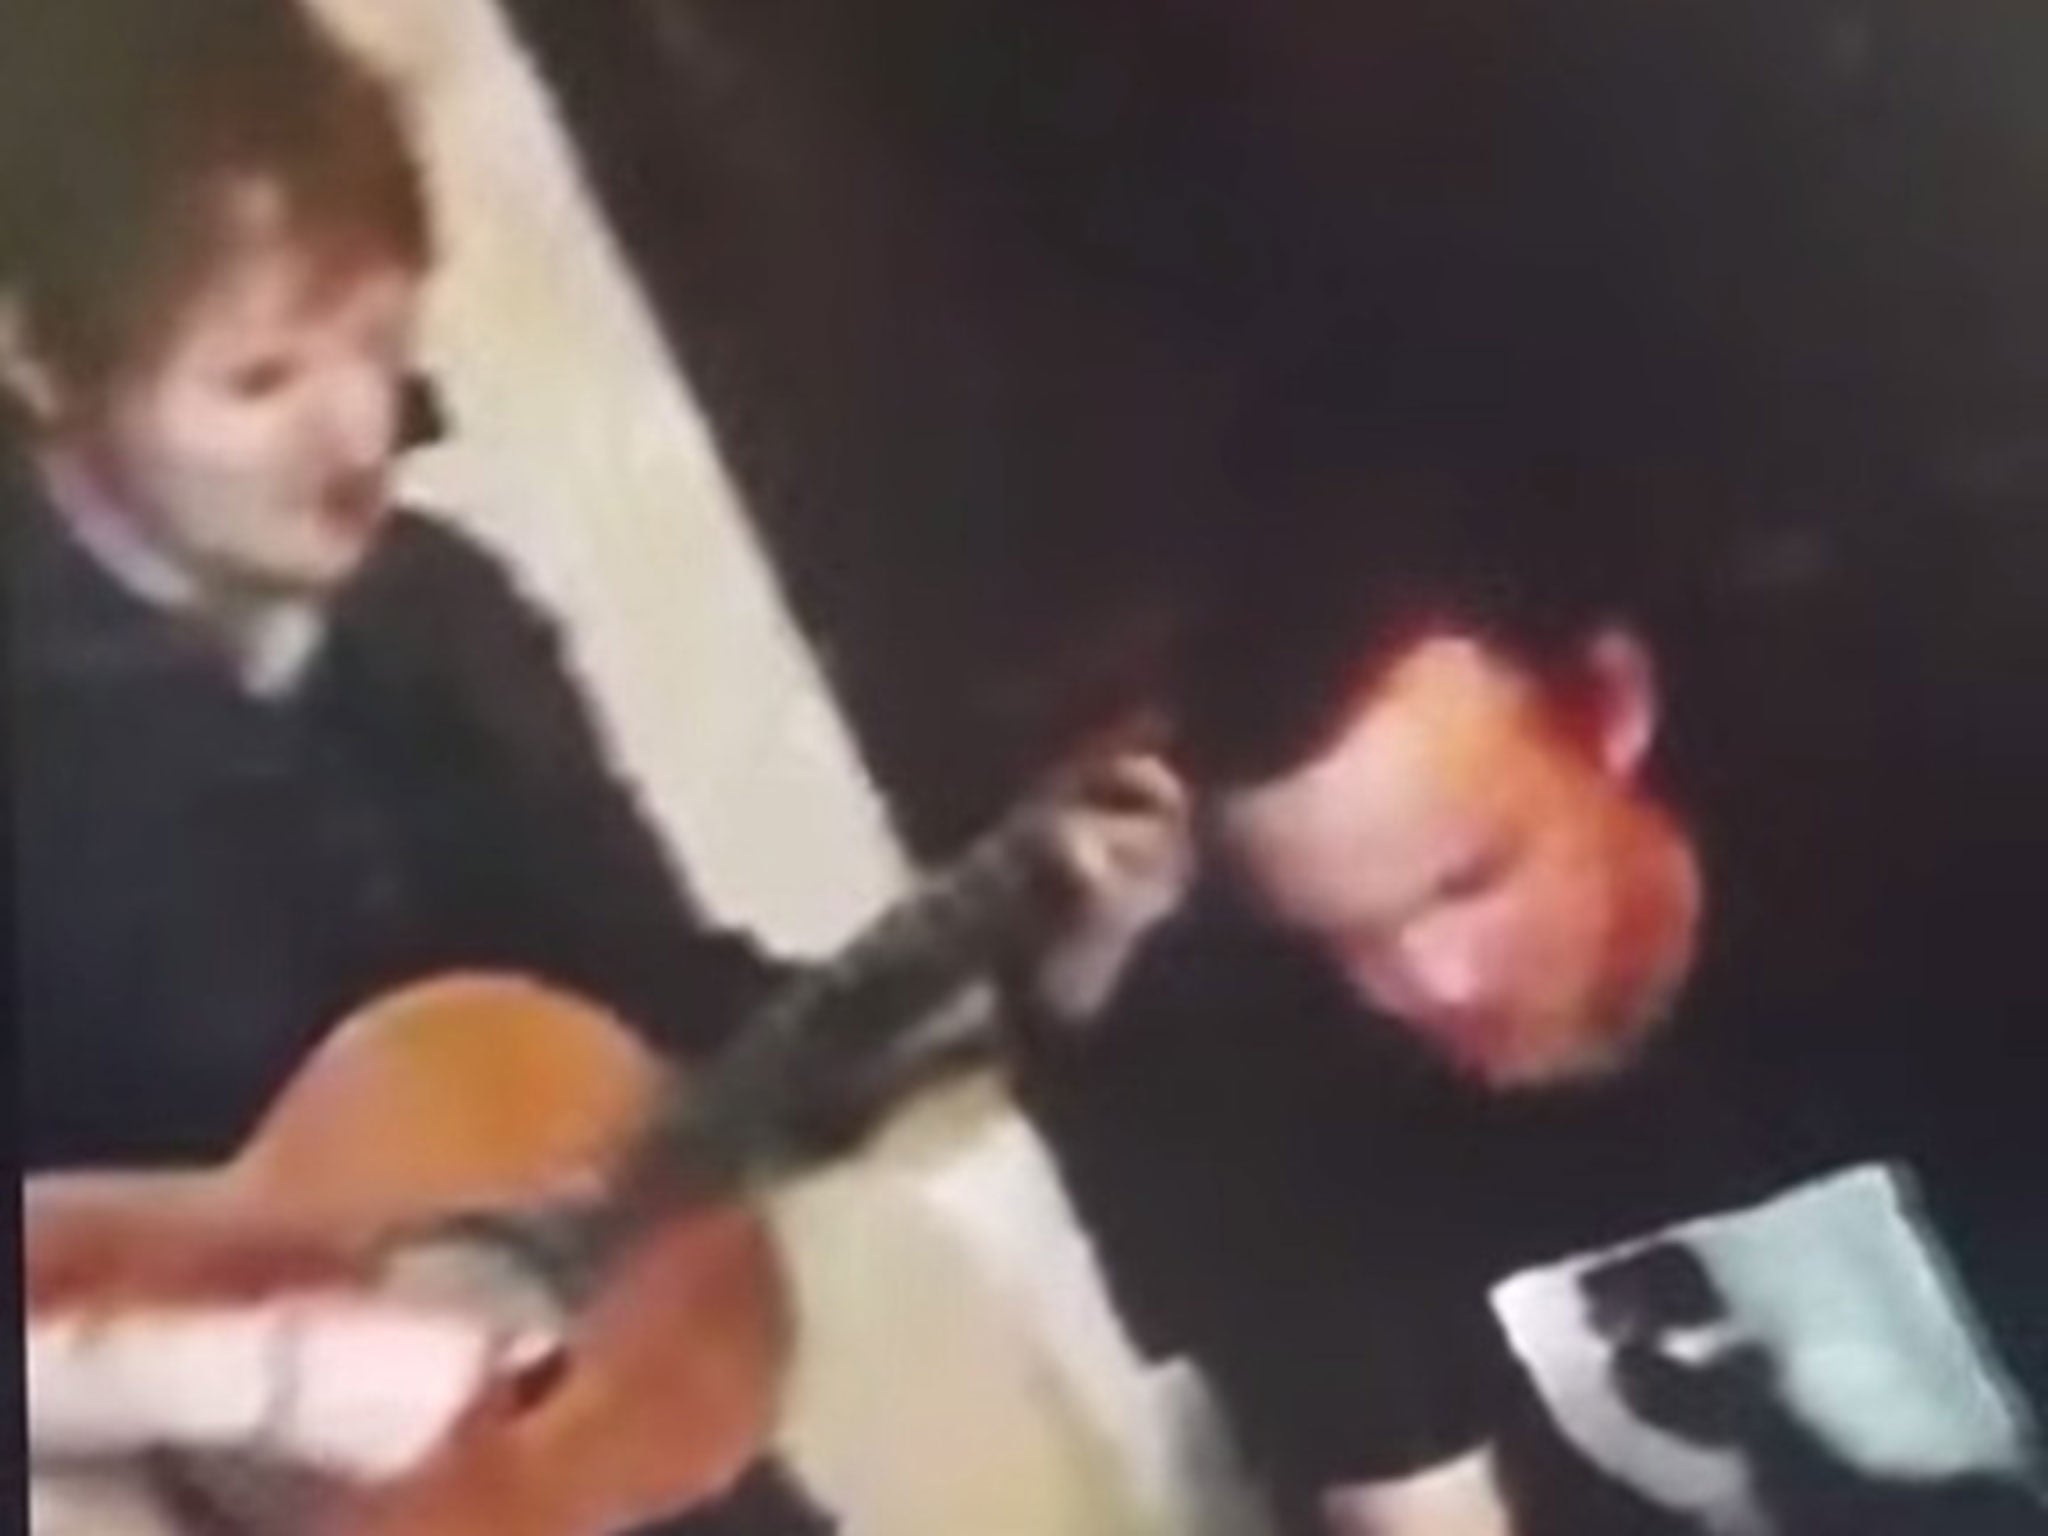 Ed Sheeran and Wayne Rooney perform at the Sir Ralph Abercromby pub near Deansgate